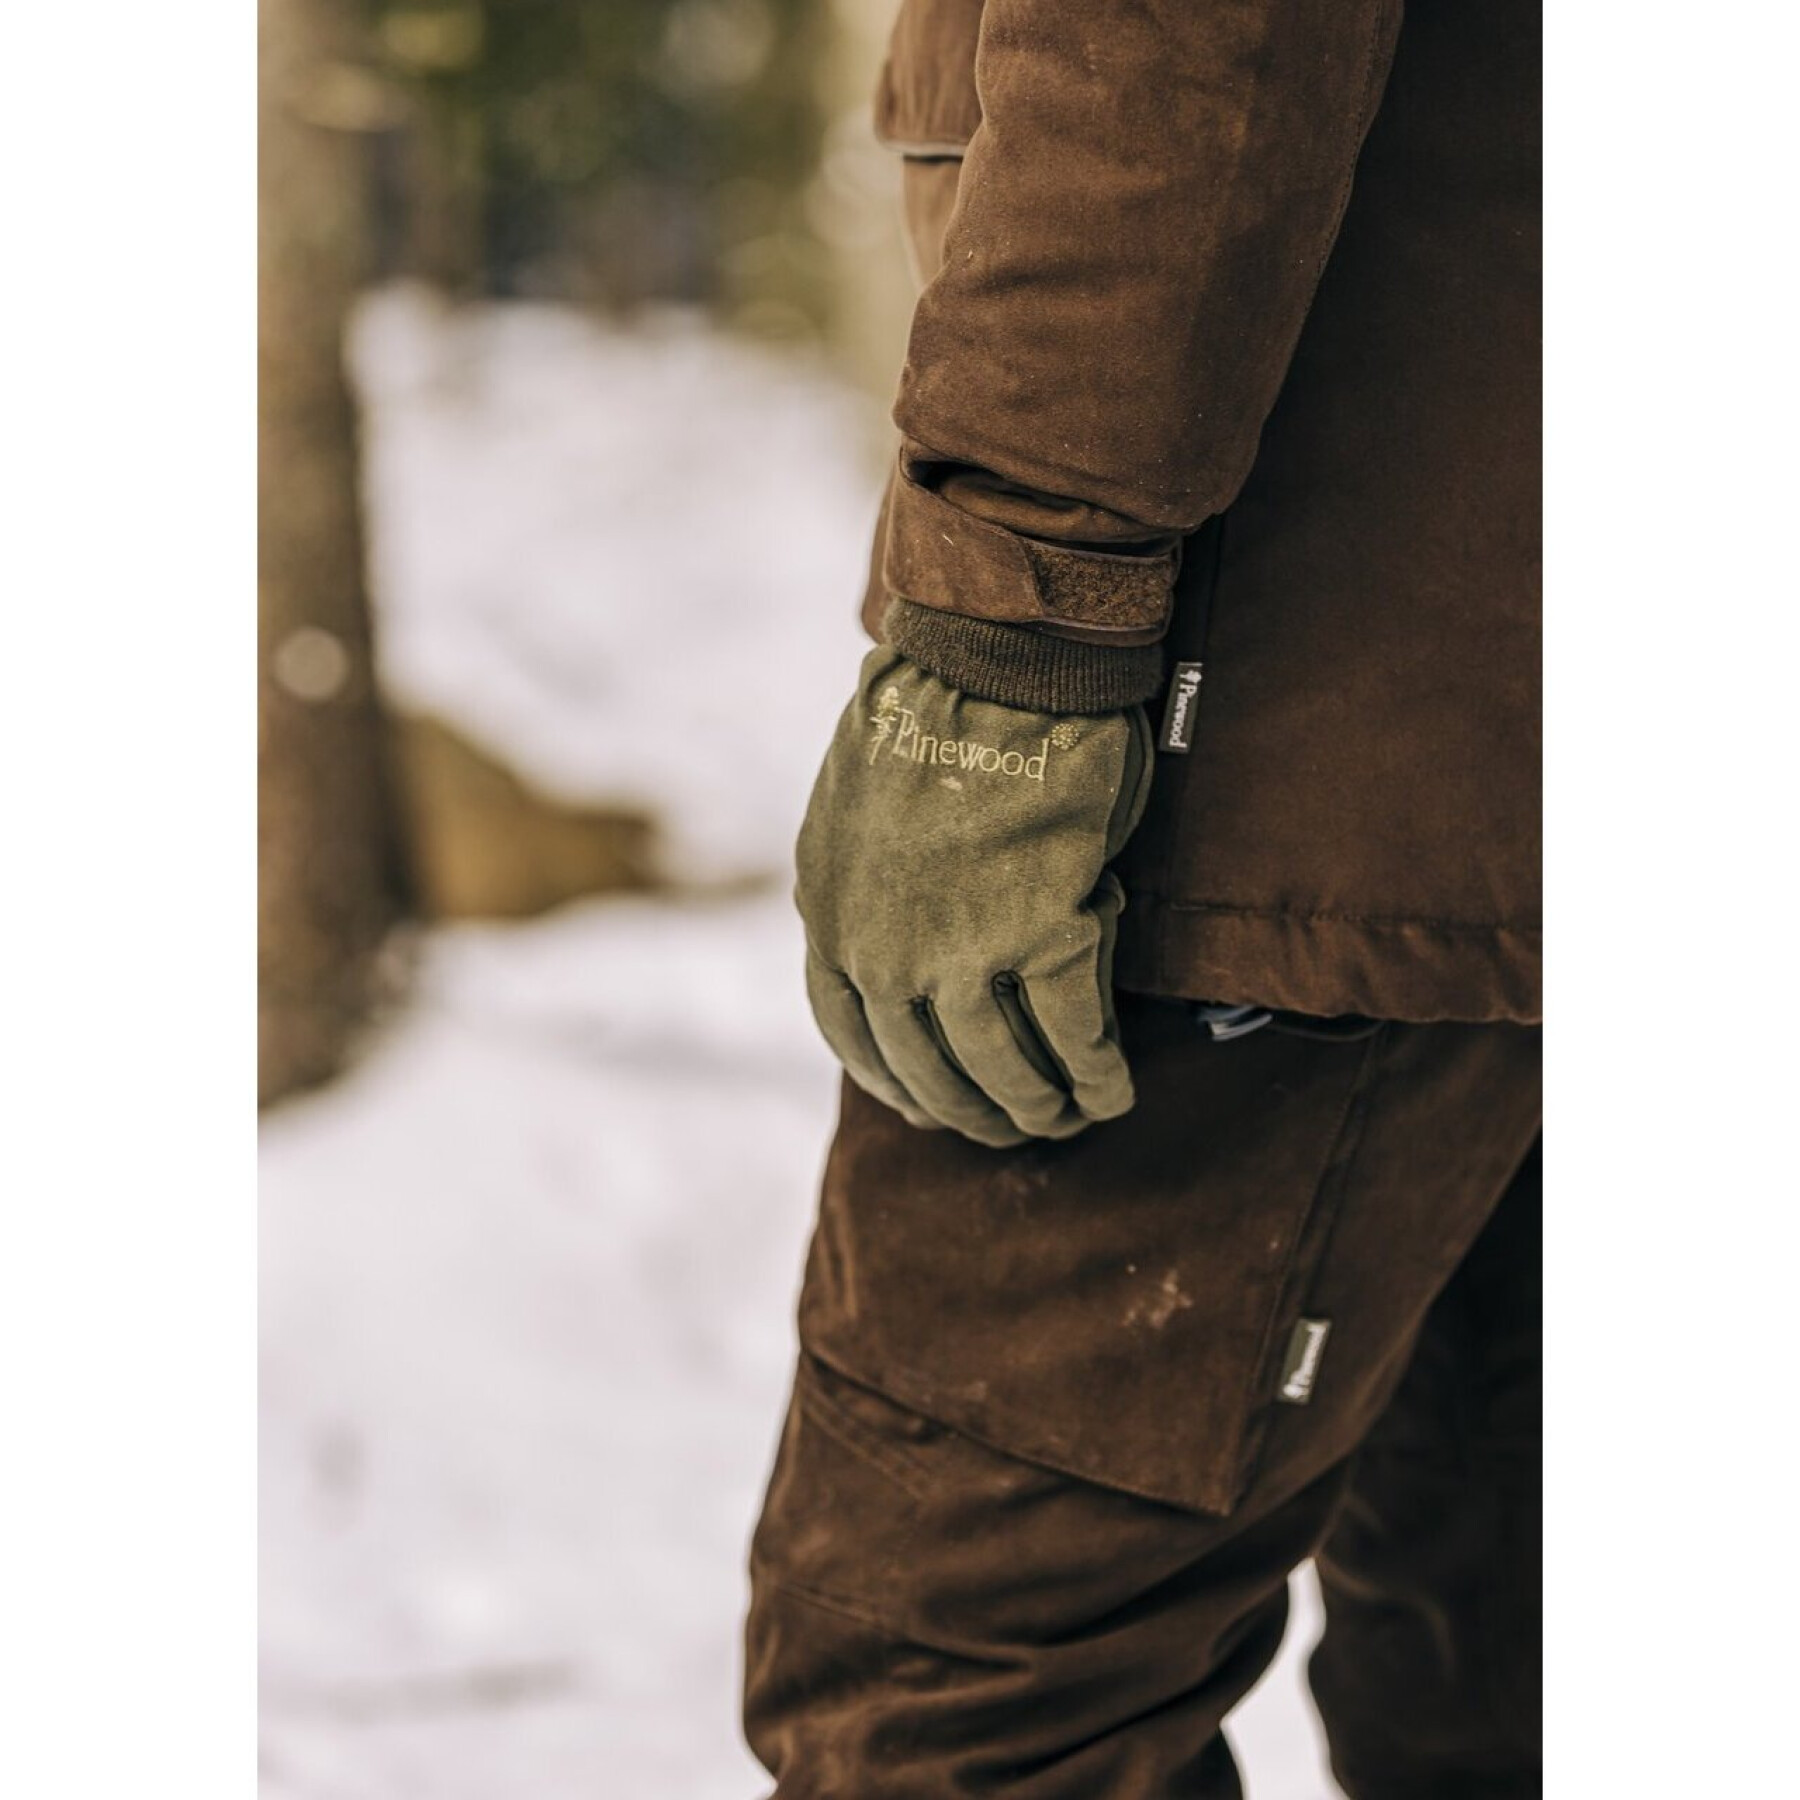 Extremely padded suede gloves Pinewood